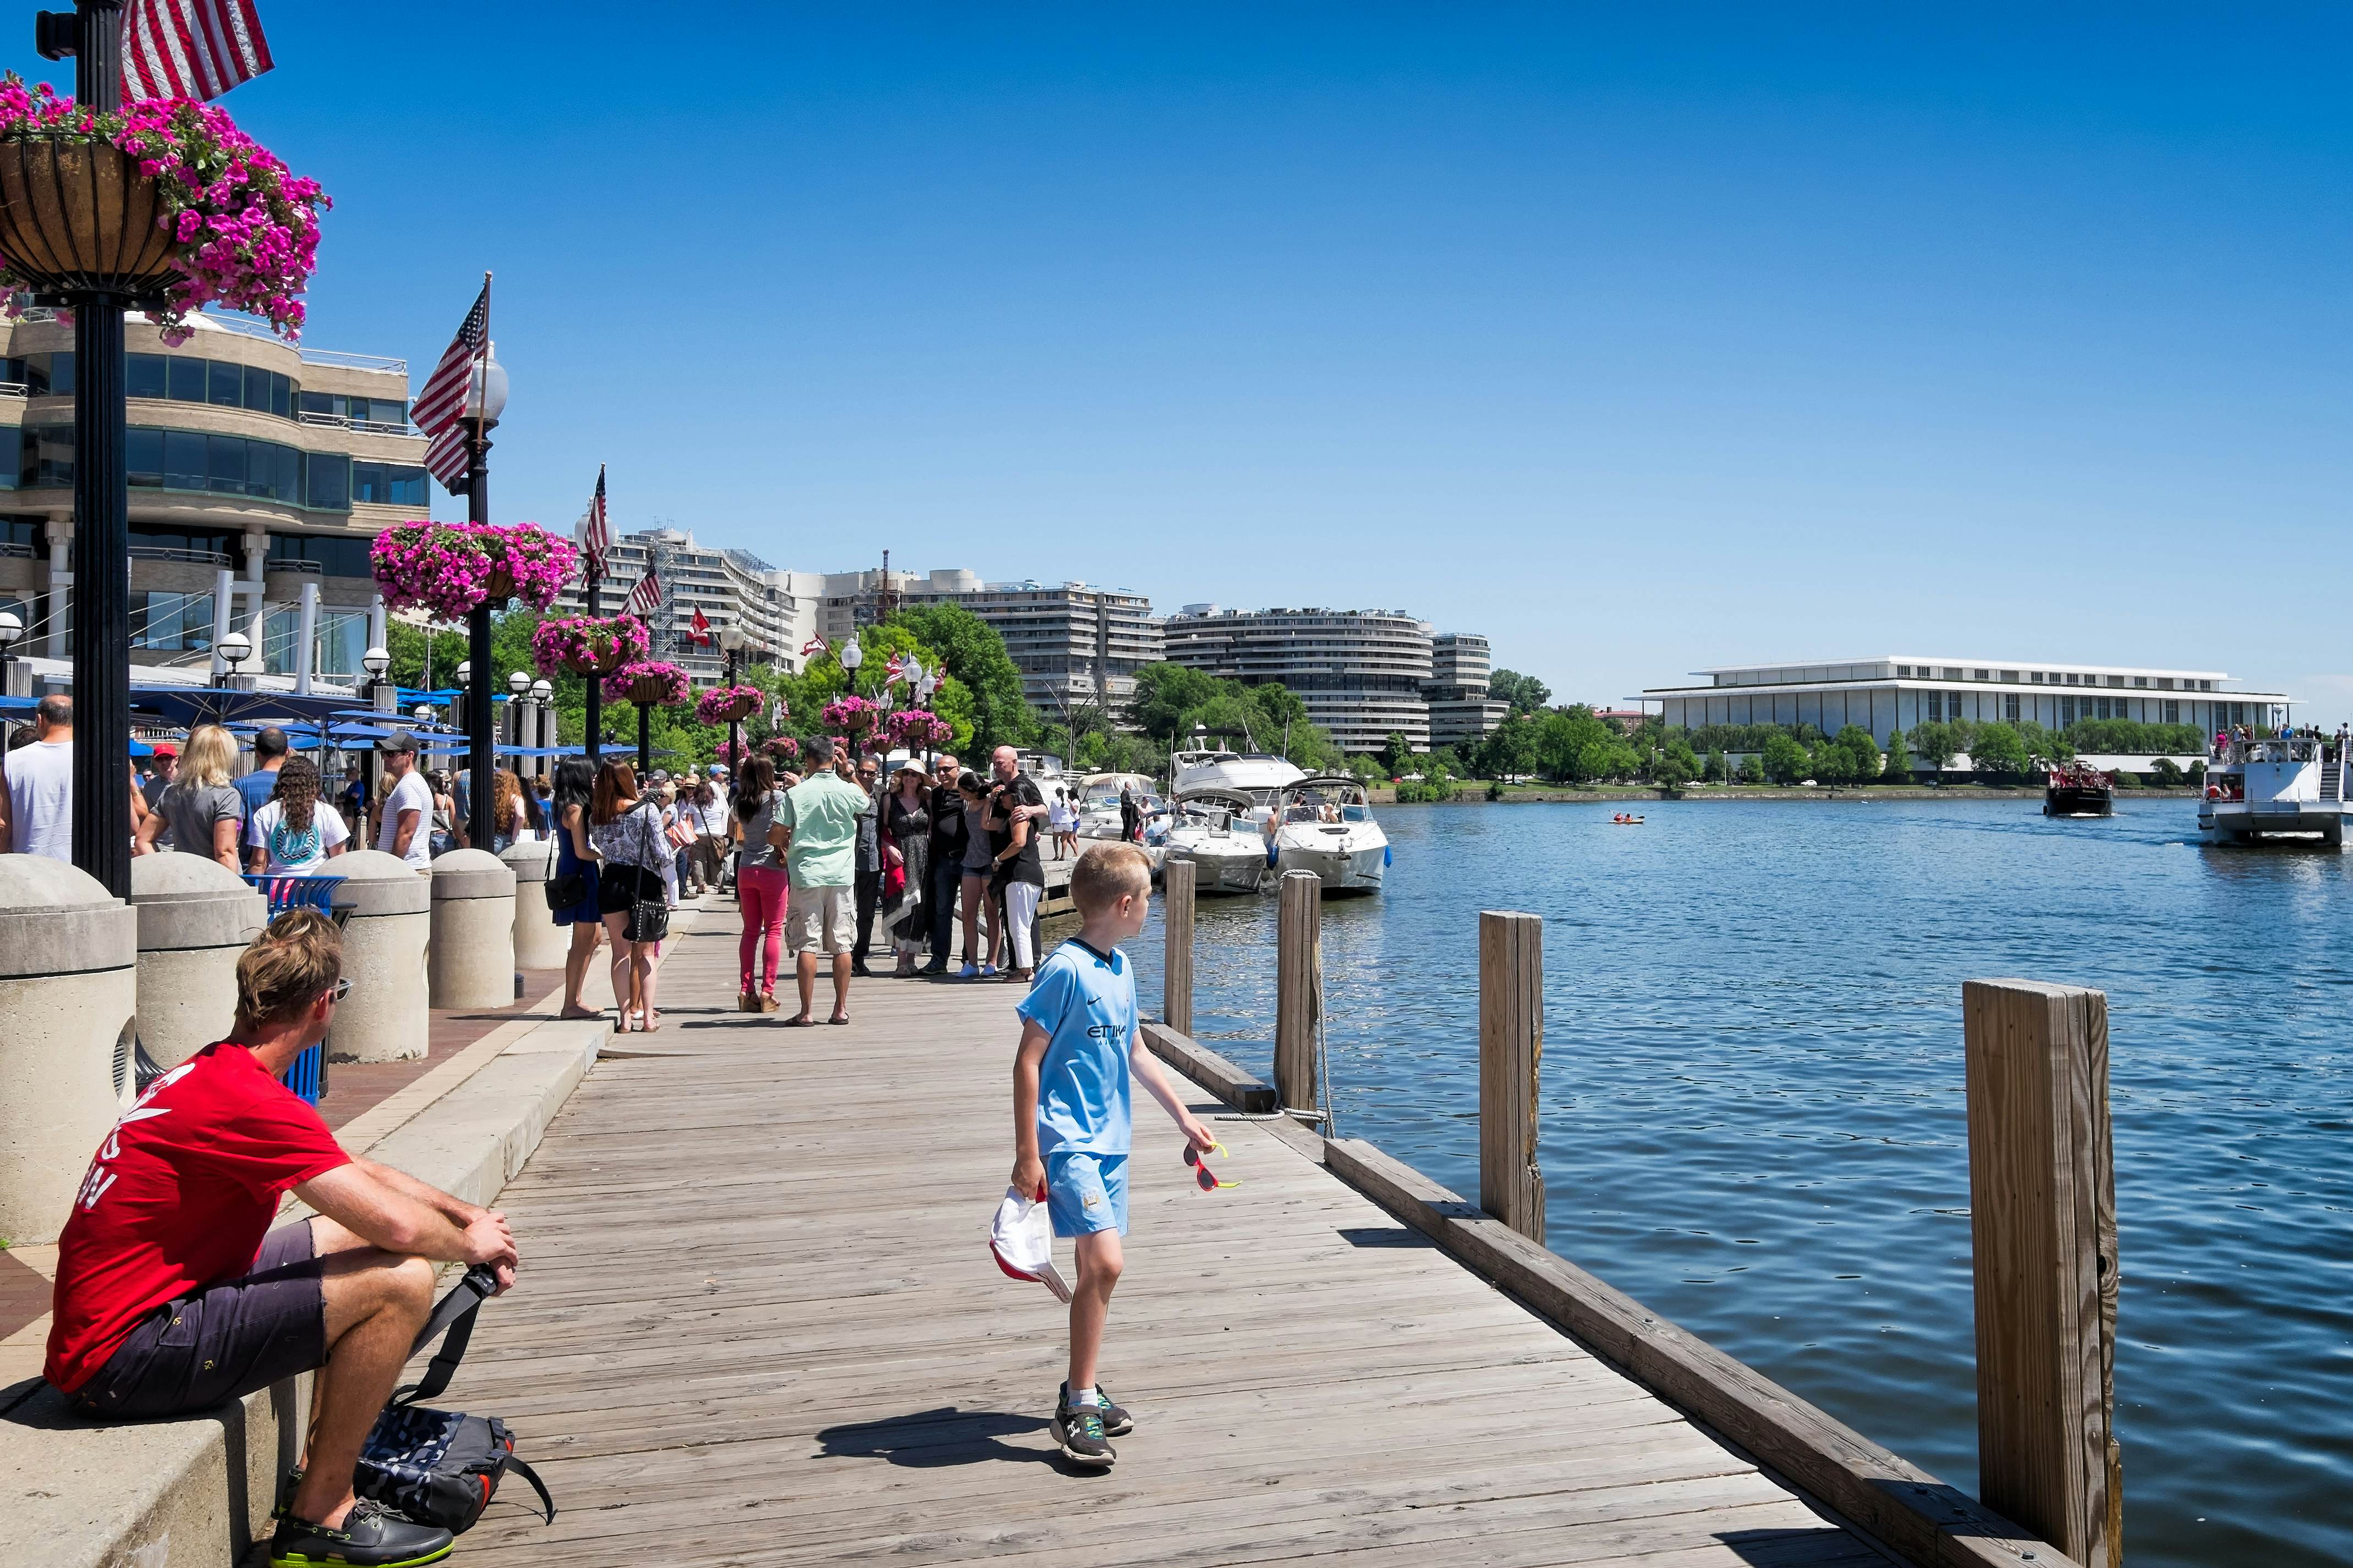 The Best Hotels in Washington DC for Sightseeing